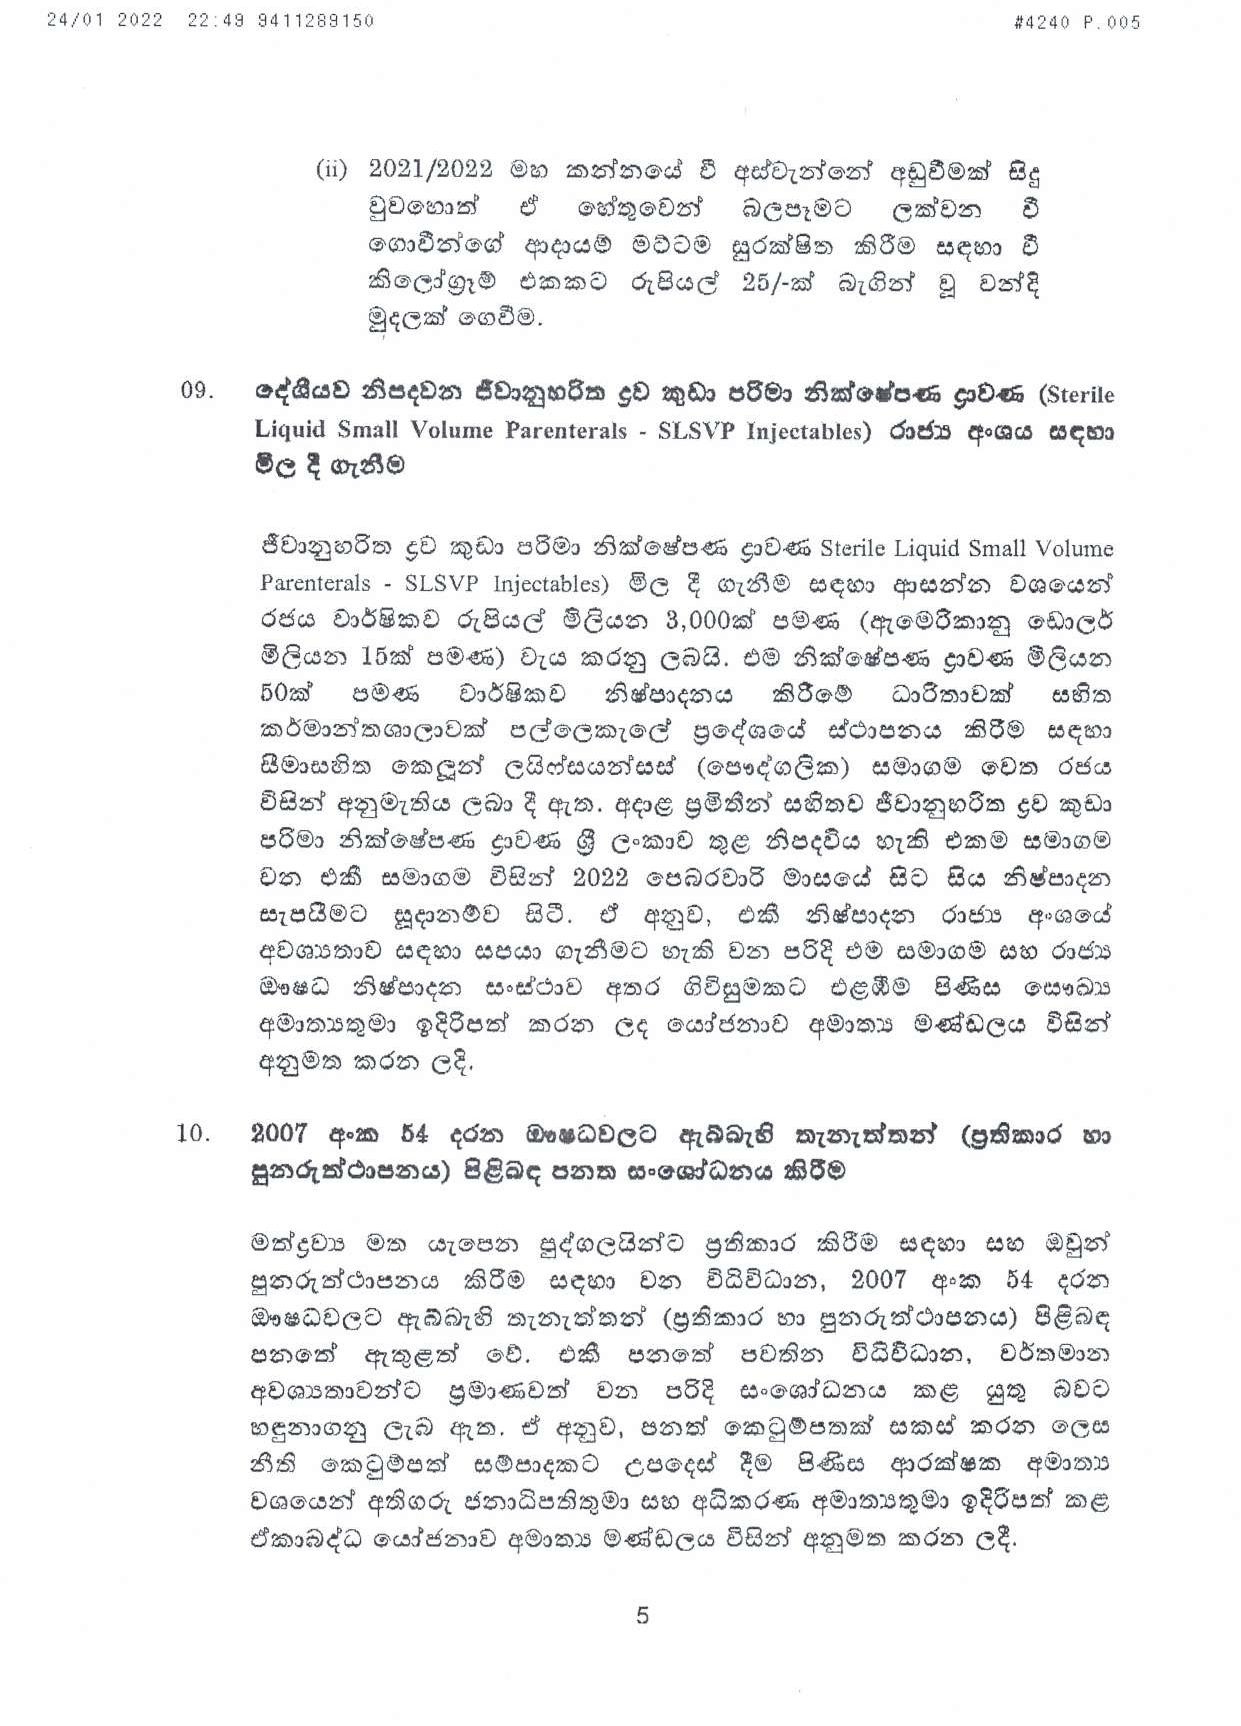 Cabinet Decision on 24.01.2022 page 005